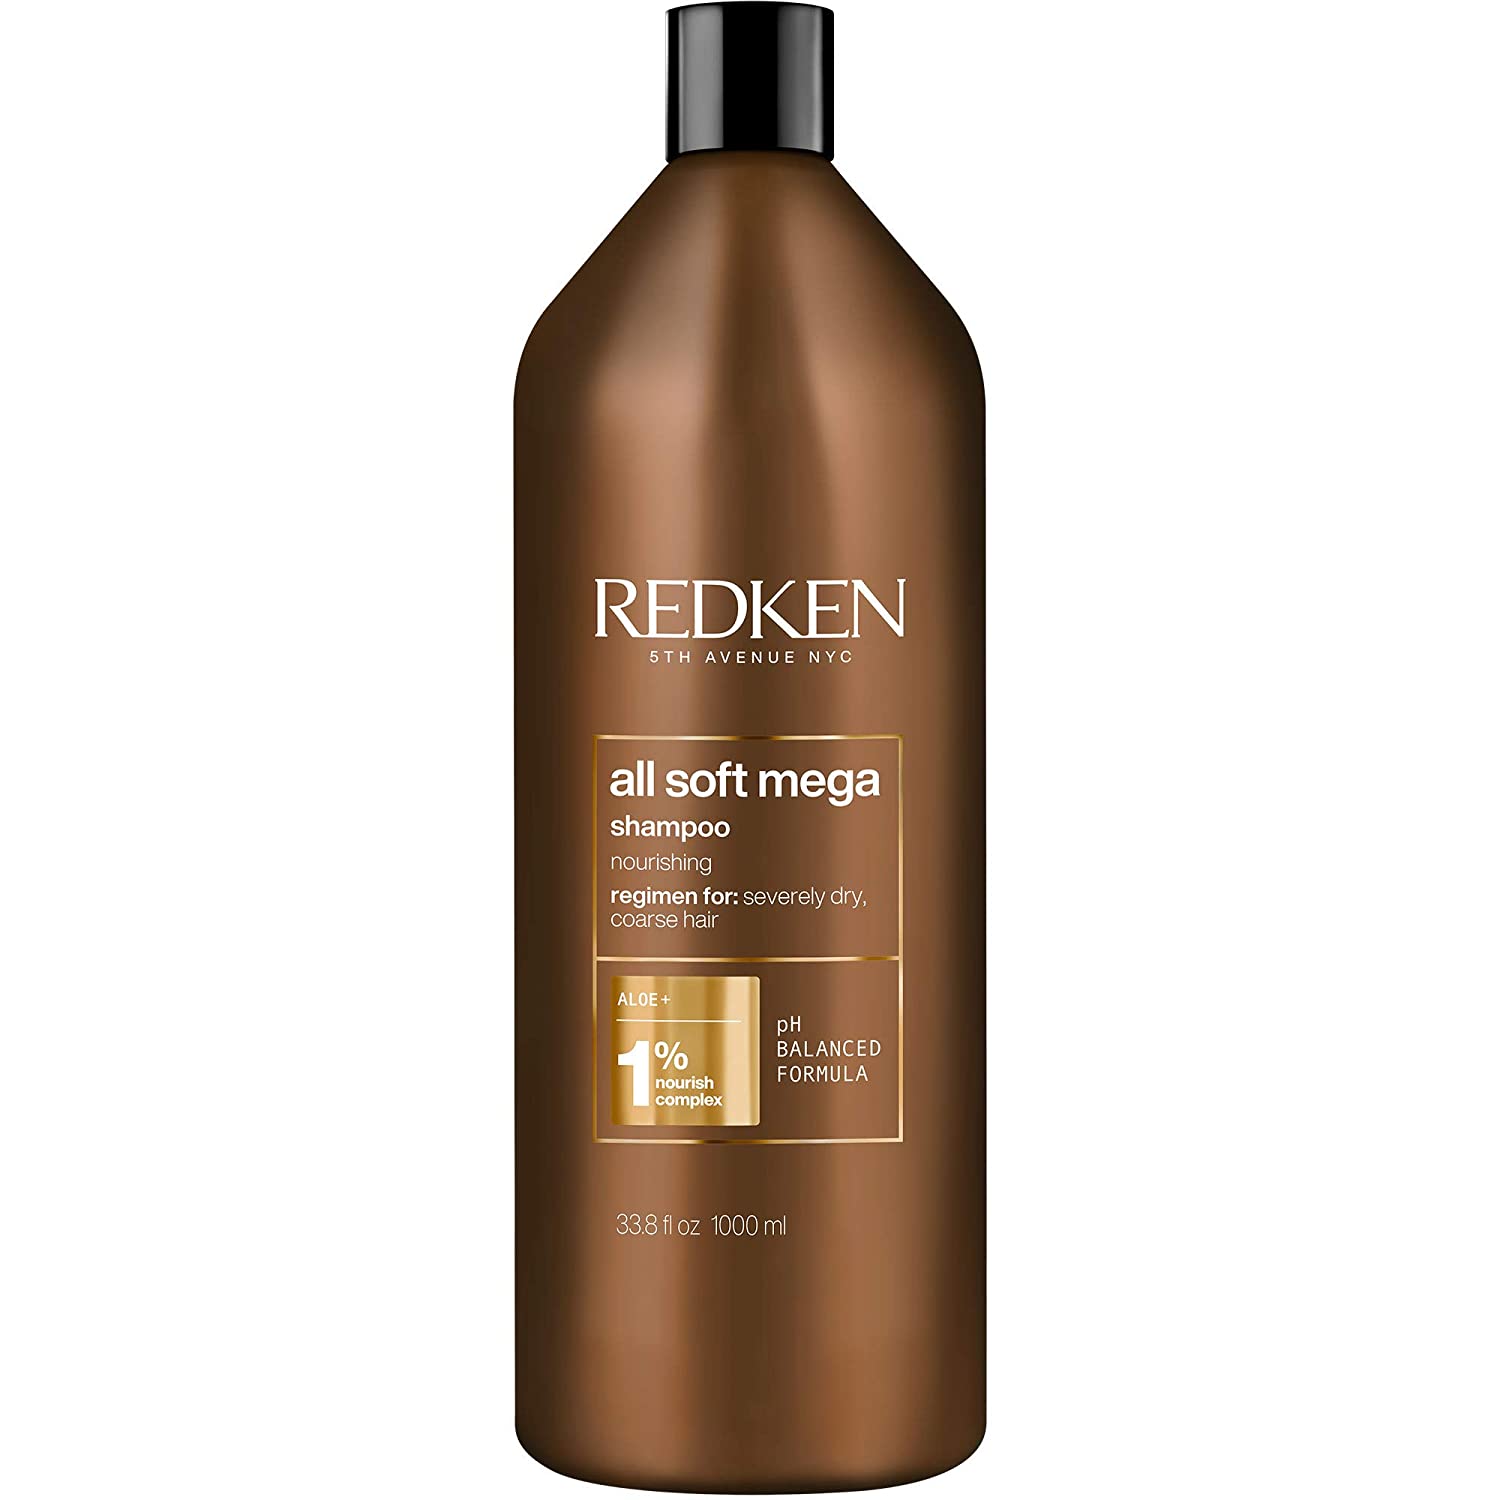 Redken All Soft Mega Shampoo / 1000ml Redken Hair Products for Preventing Moisture Loss and Keep the Severely Dry Hair Hydrated and Soft